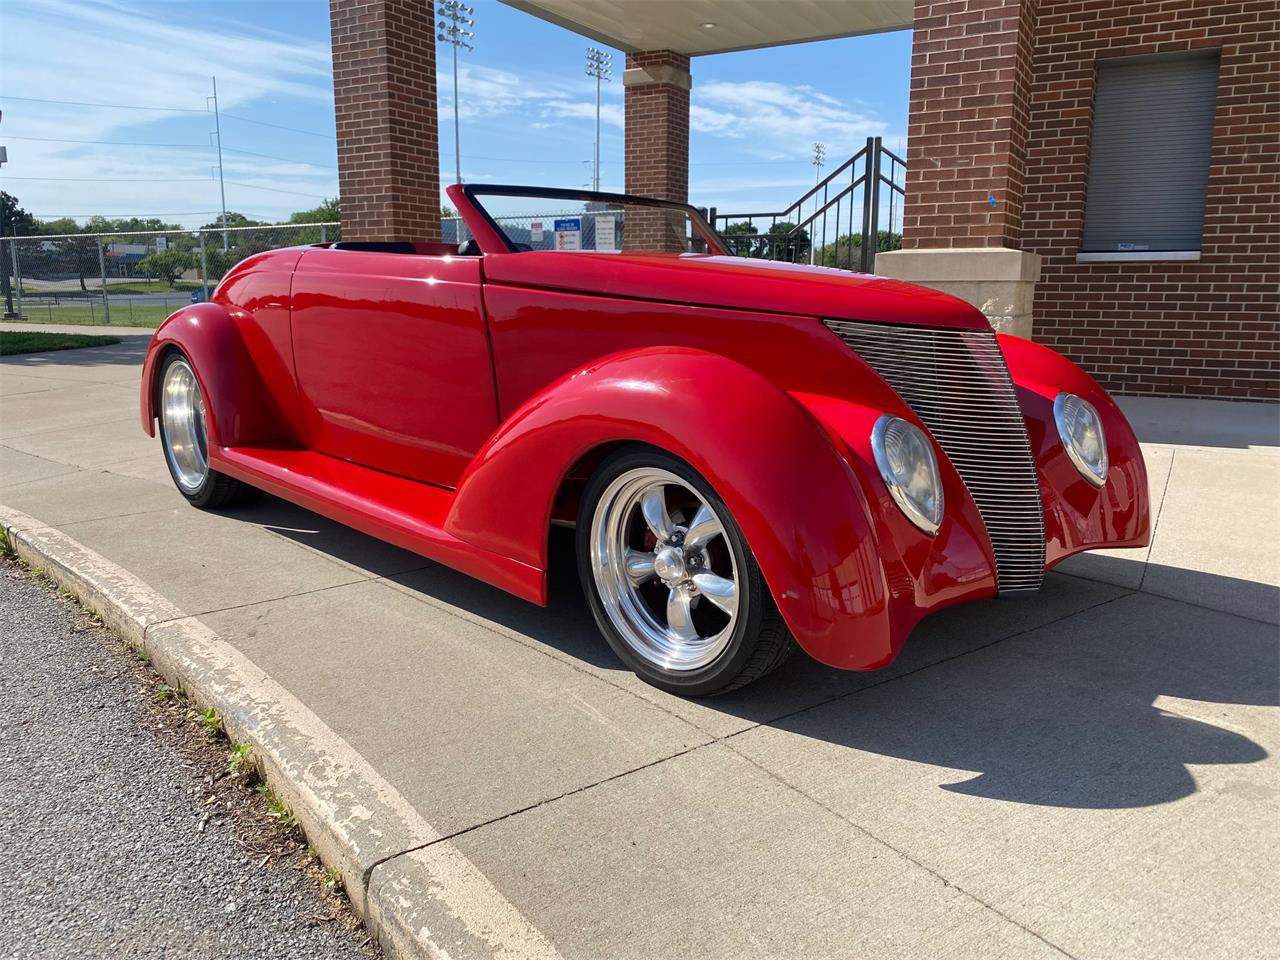 For Sale: 1937 Ford Roadster in Davenport, Iowa for sale in Davenport, IA